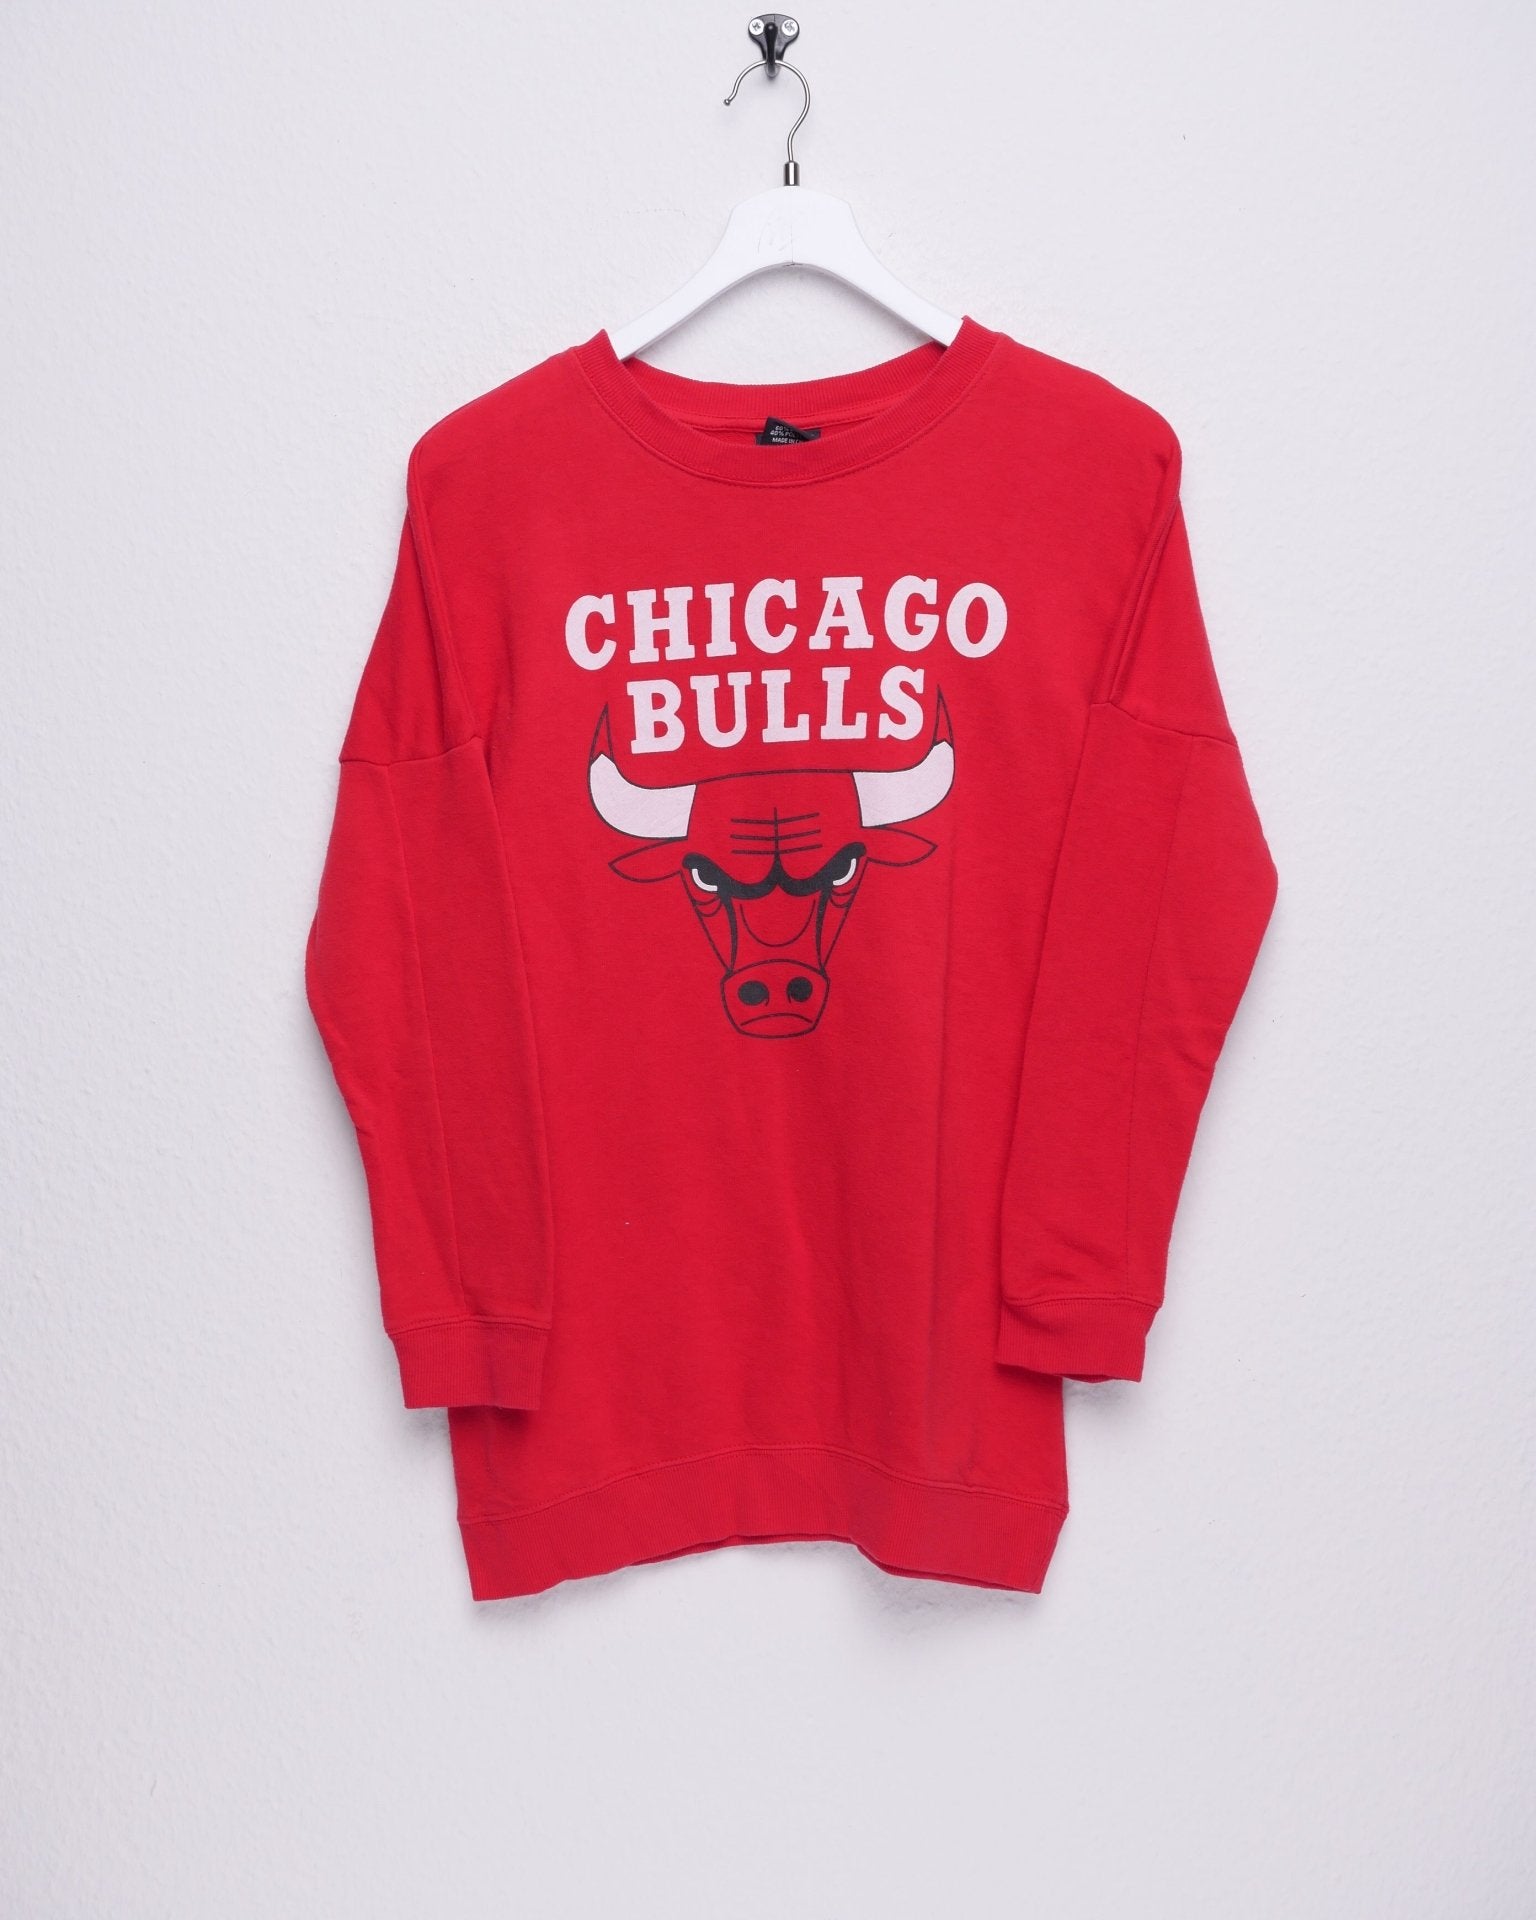 NBA 'Chicago Bulls' printed Graphic red Sweater - Peeces